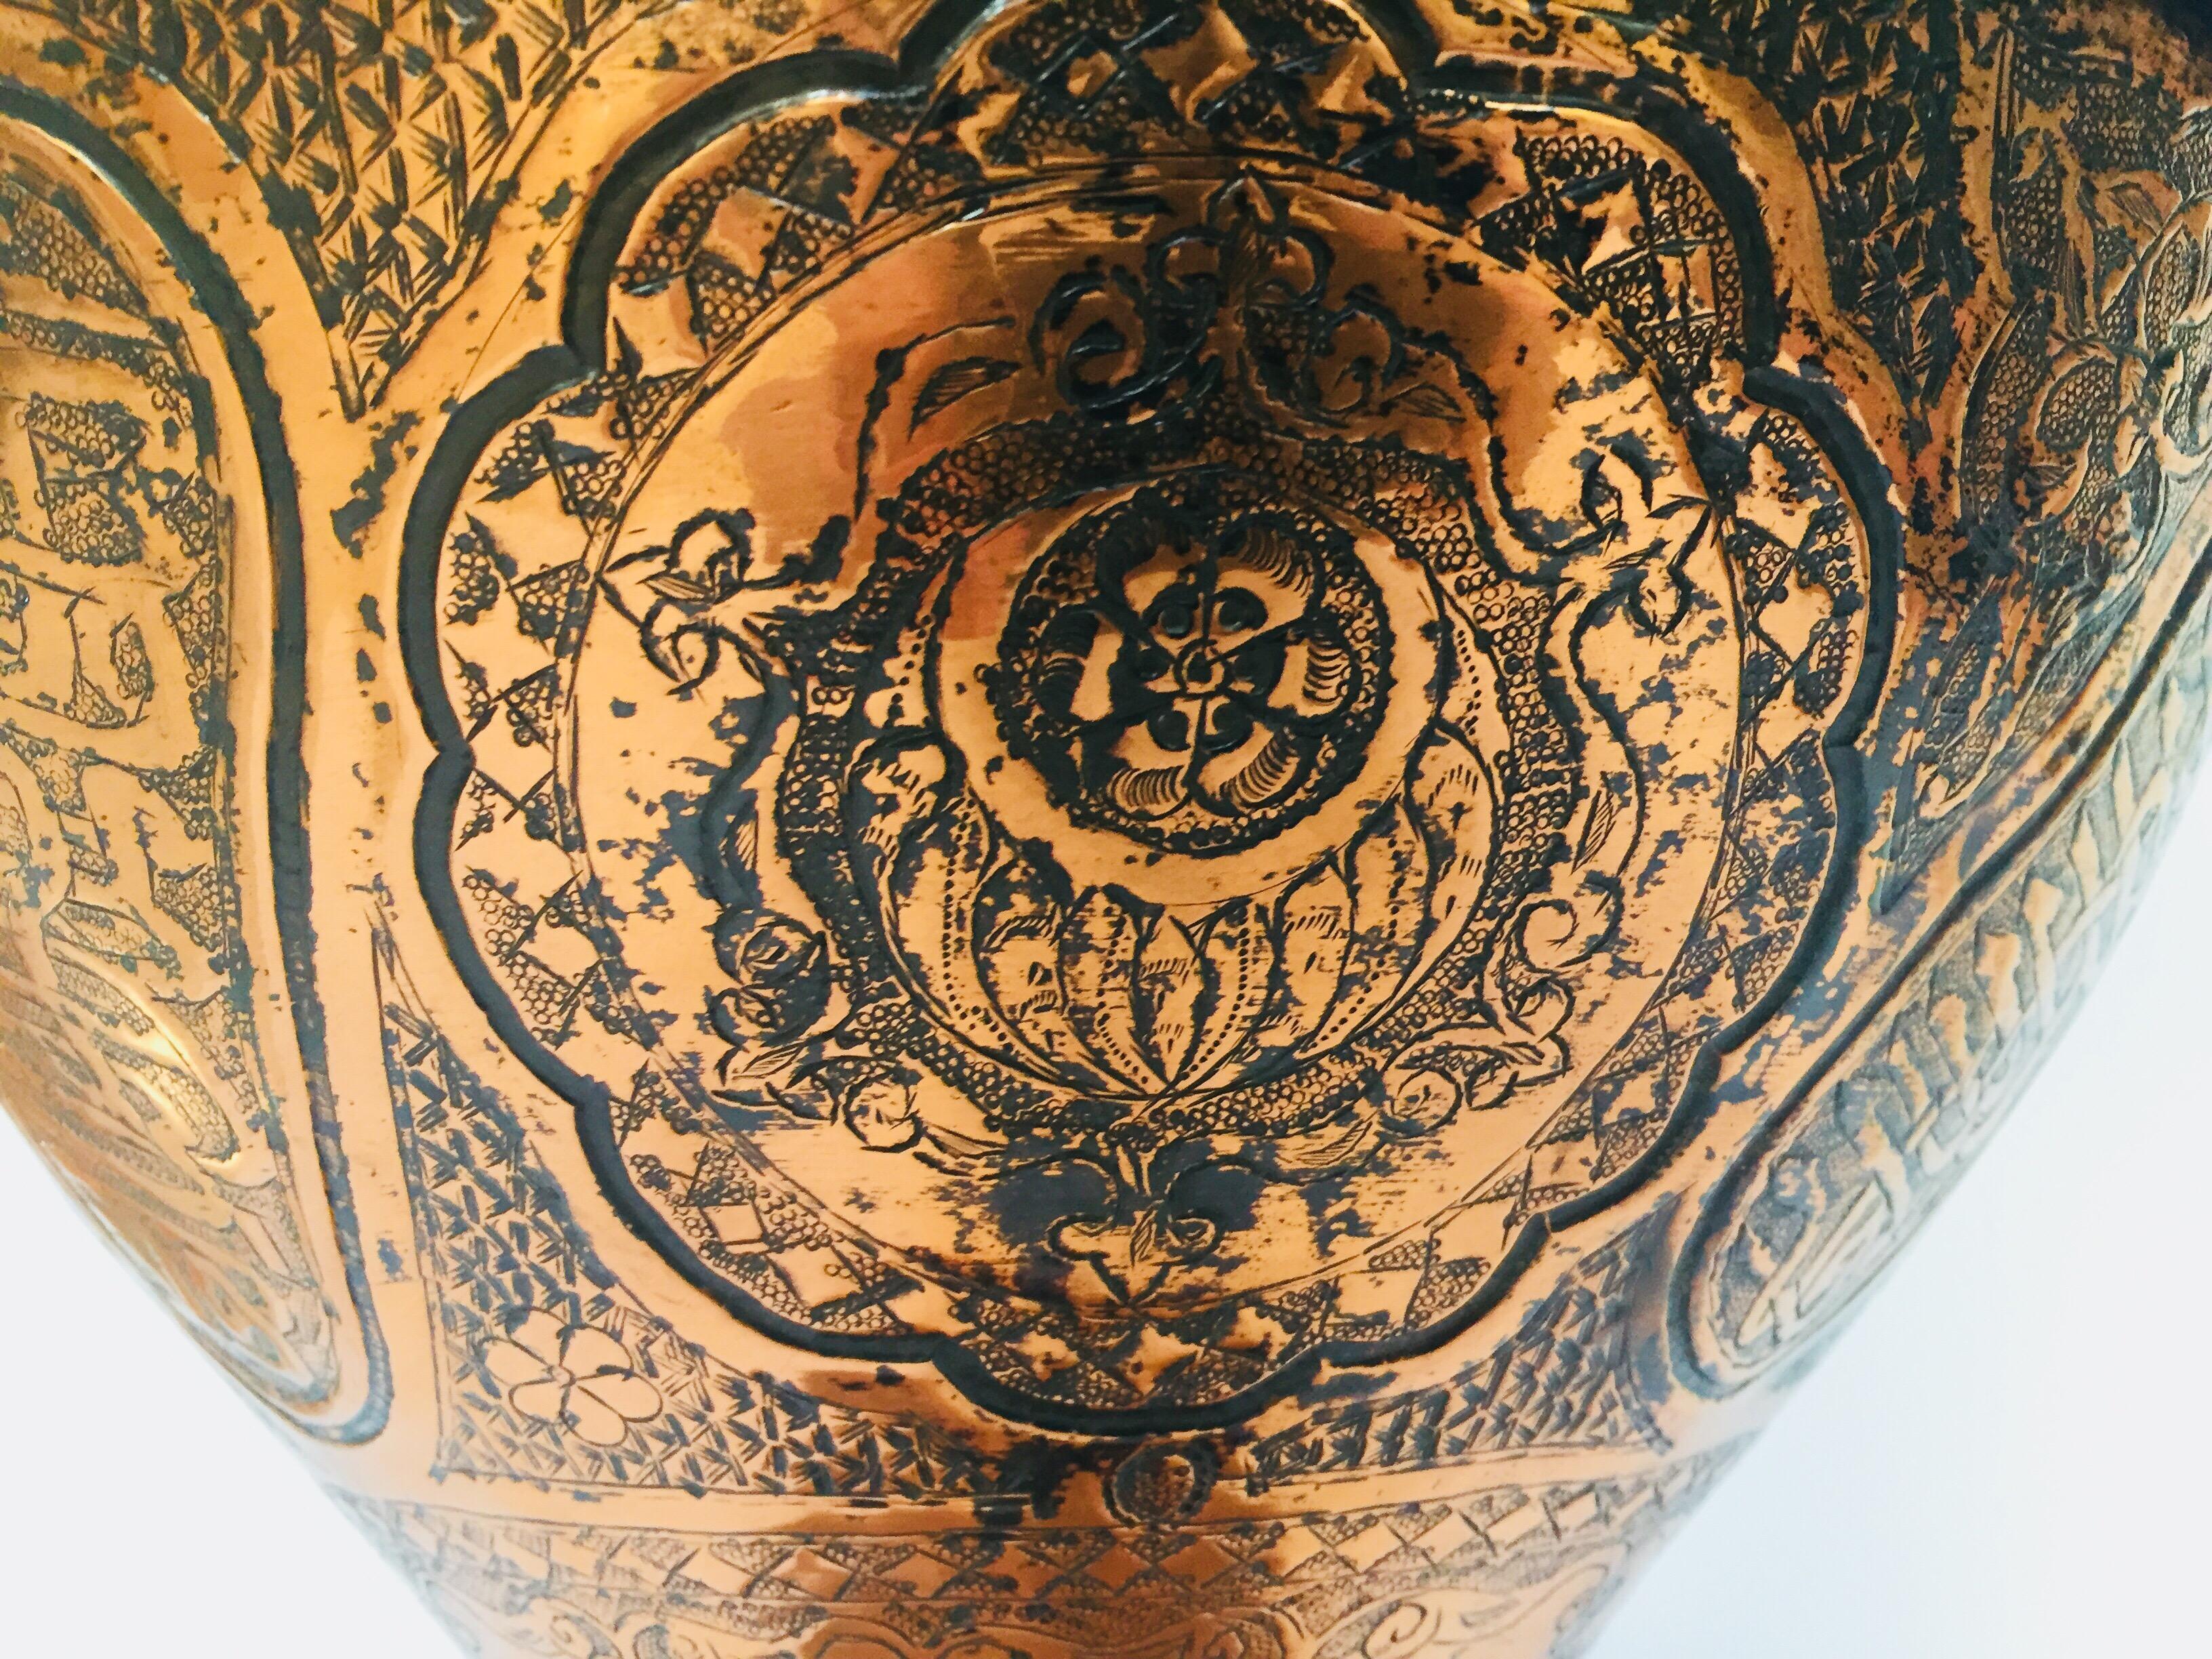 Middle Eastern Syrian Copper Islamic Art Vase Engraved with Arabic Calligraphy 5